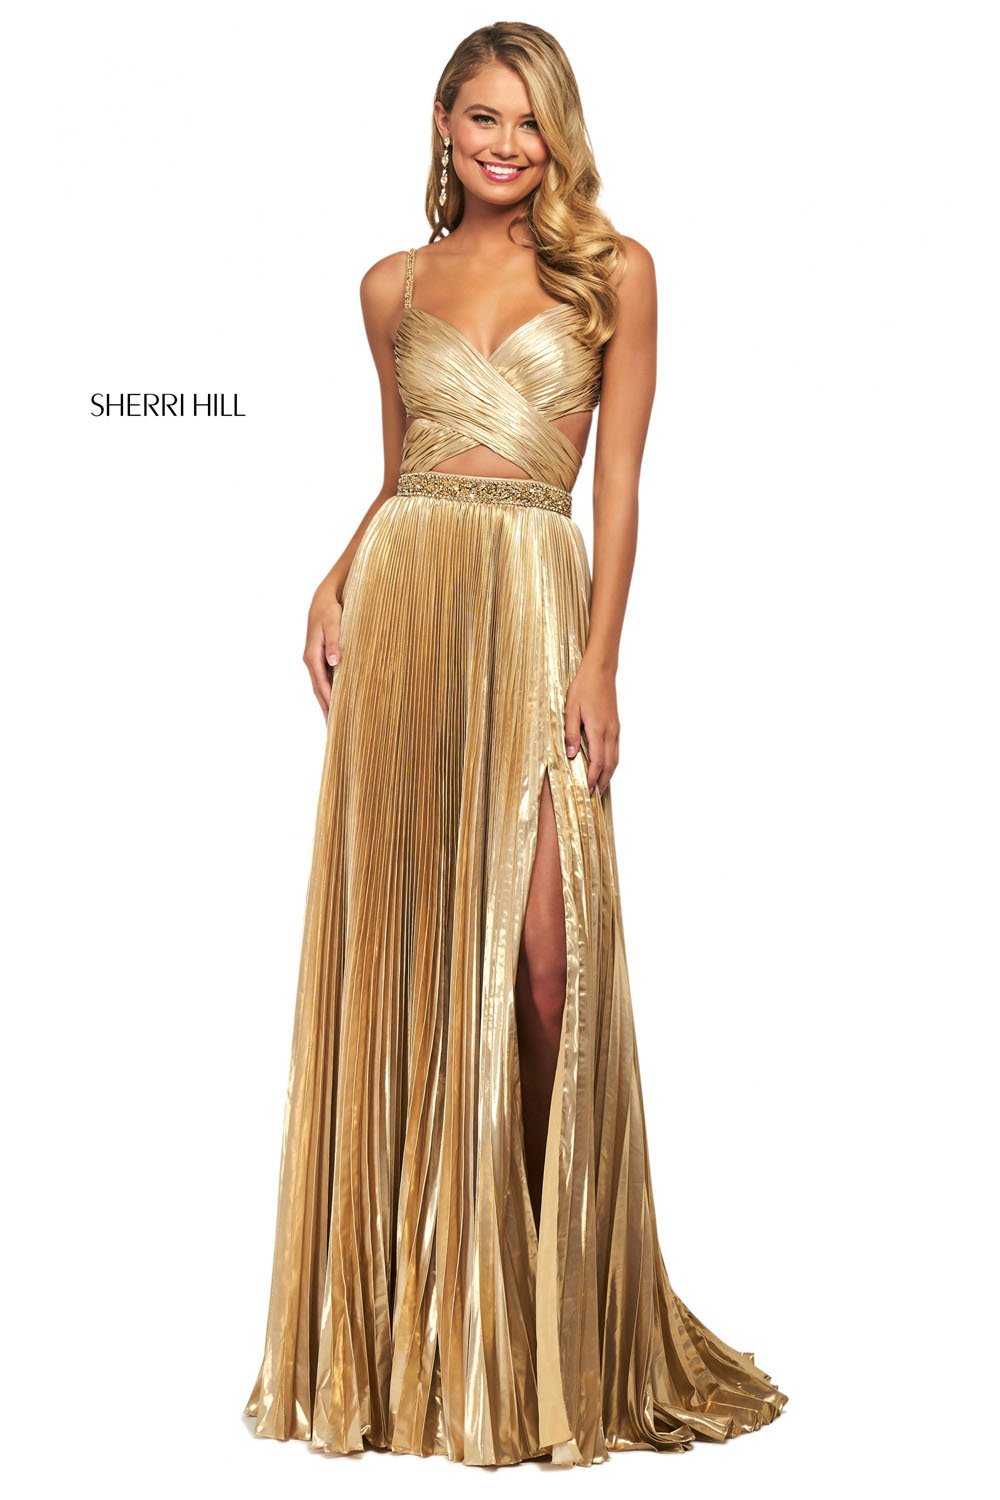 Sherri Hill 53738 dress images in these colors: Gold.